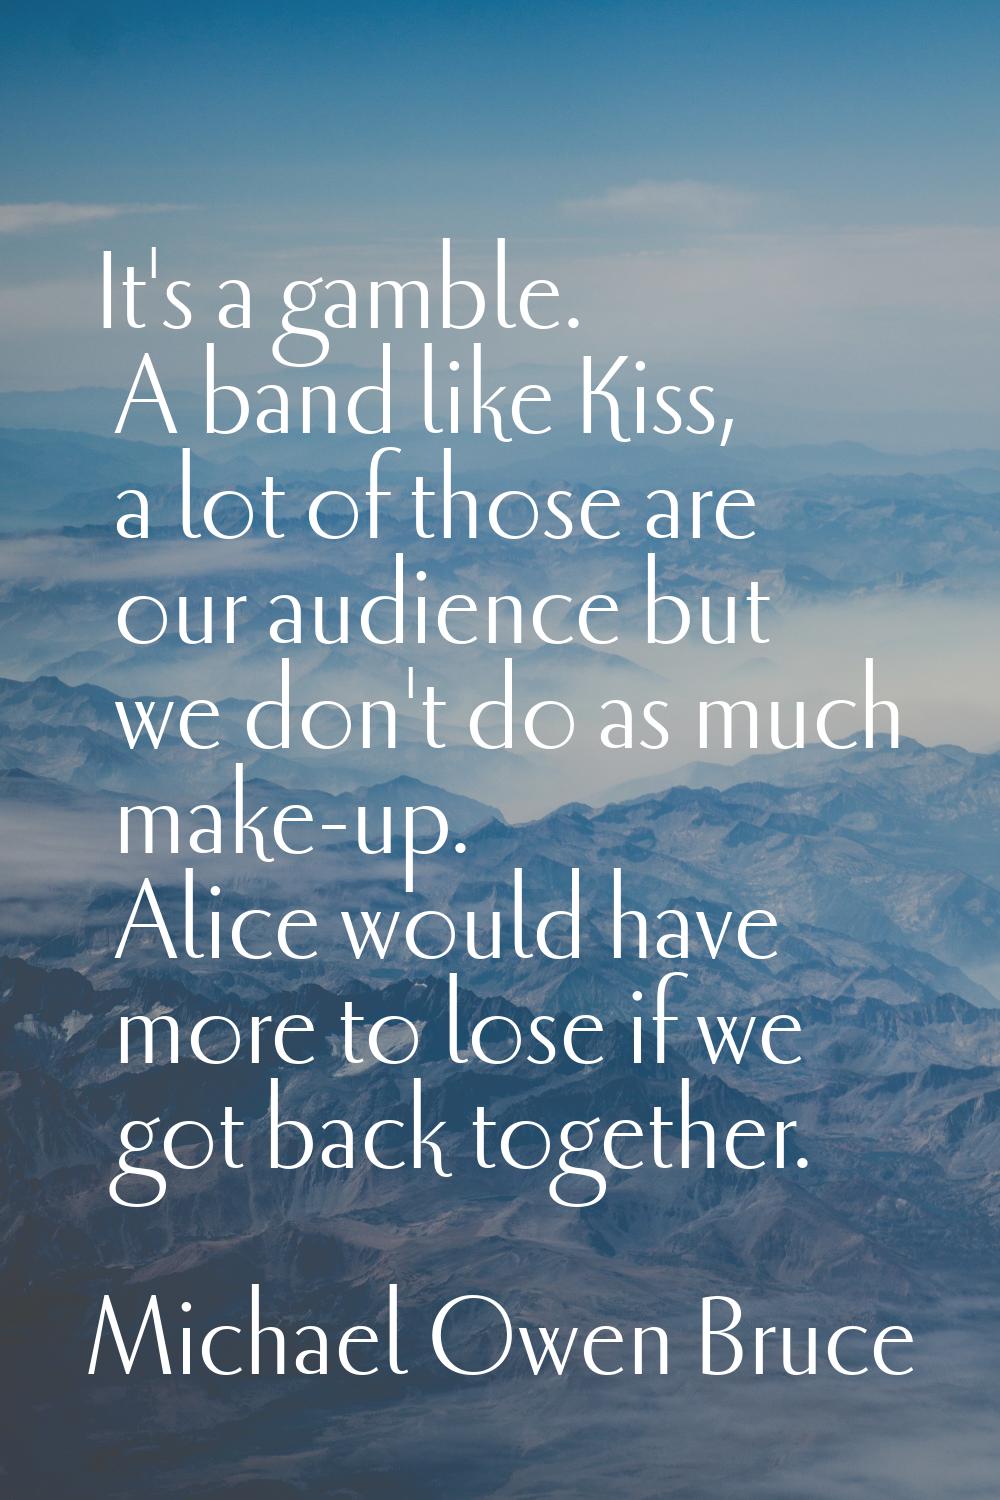 It's a gamble. A band like Kiss, a lot of those are our audience but we don't do as much make-up. A